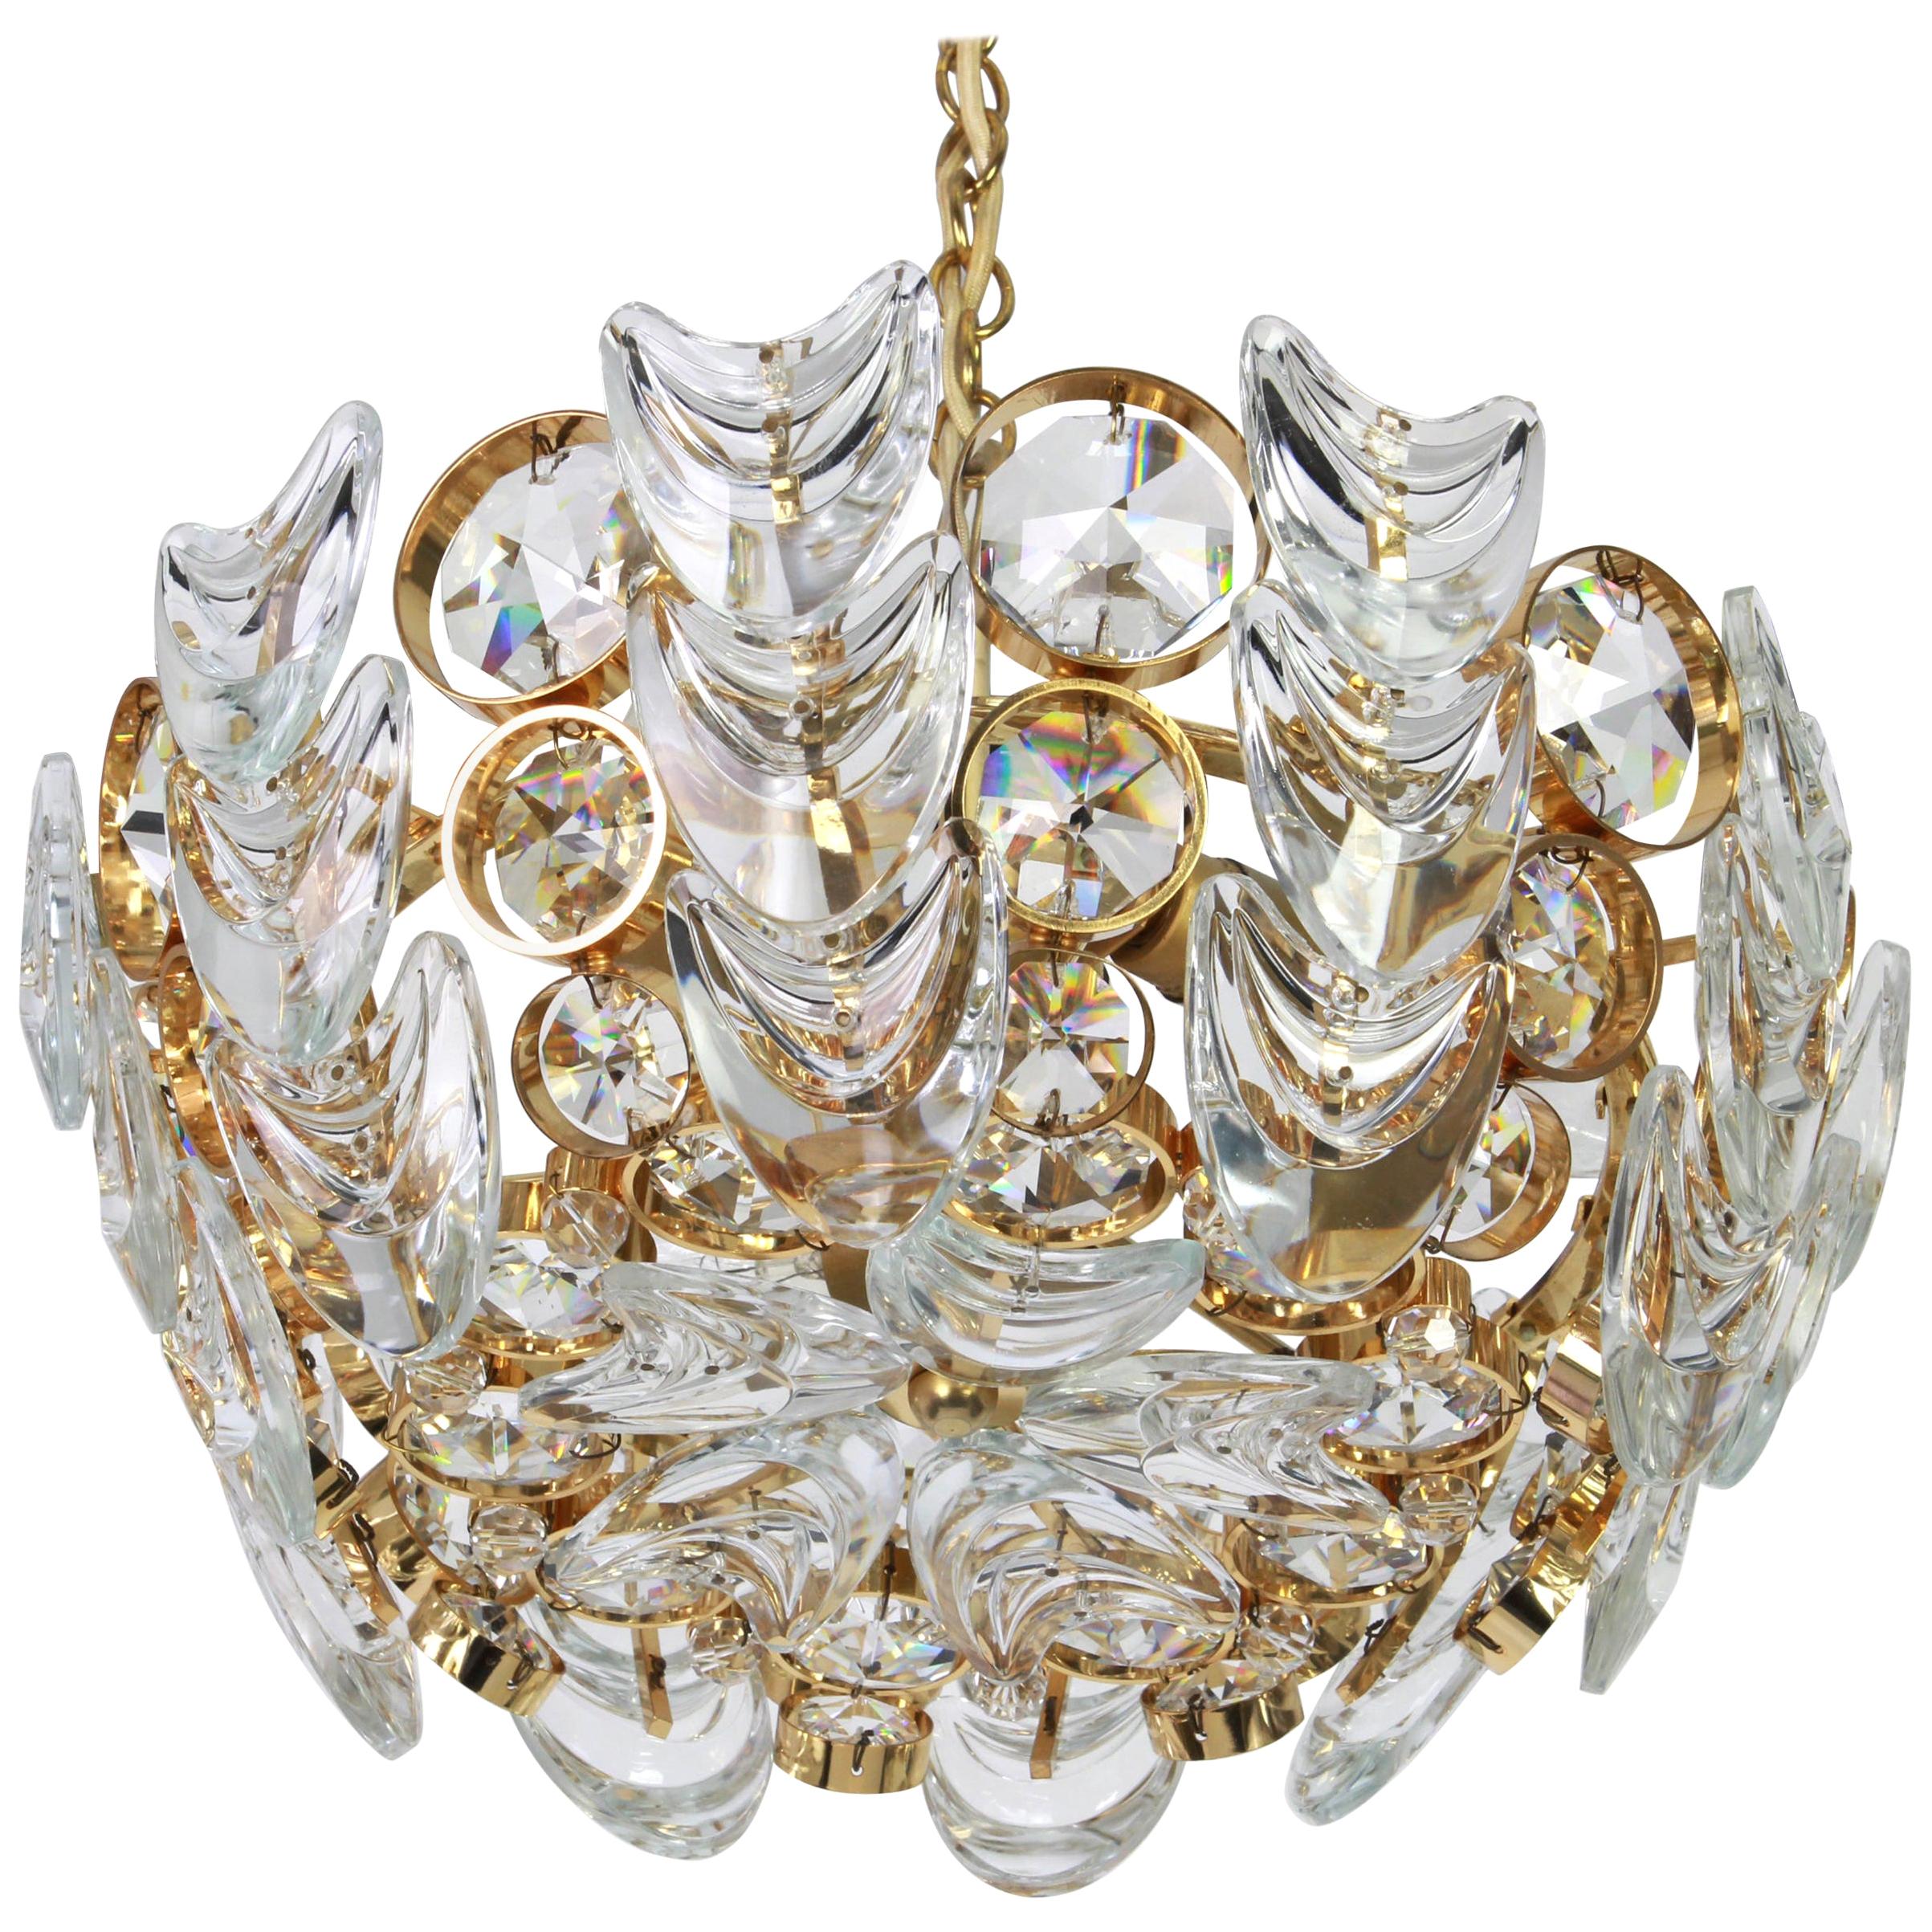 A wonderful petite and high-quality gilded chandelier/pendant light fixture by Palwa (Palme & Walter), Germany, 1970s

It is made of a 24-carat gold-plated brass frame decorated with hundreds of cut crystal glass. The bottom is made of a round cut